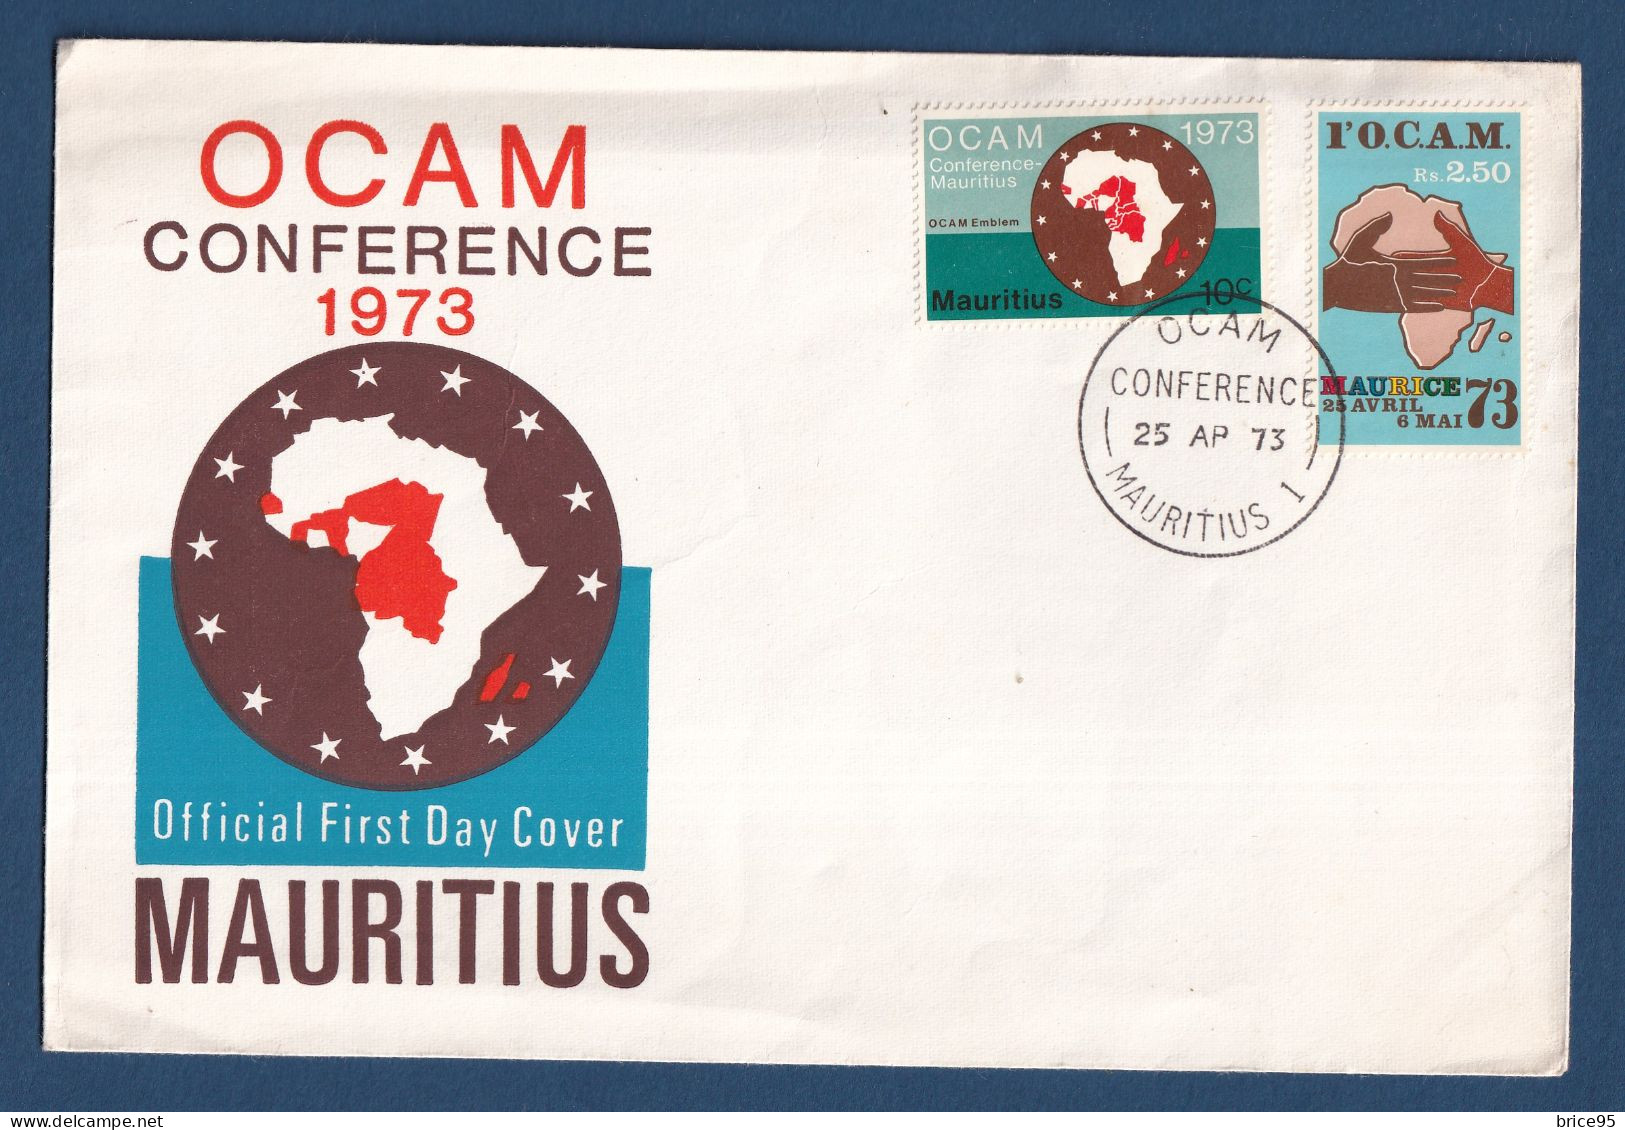 Maurice - OCAM Conference - FDC - Premier Jour - Mauritius - 1973 - Maurice (1968-...)